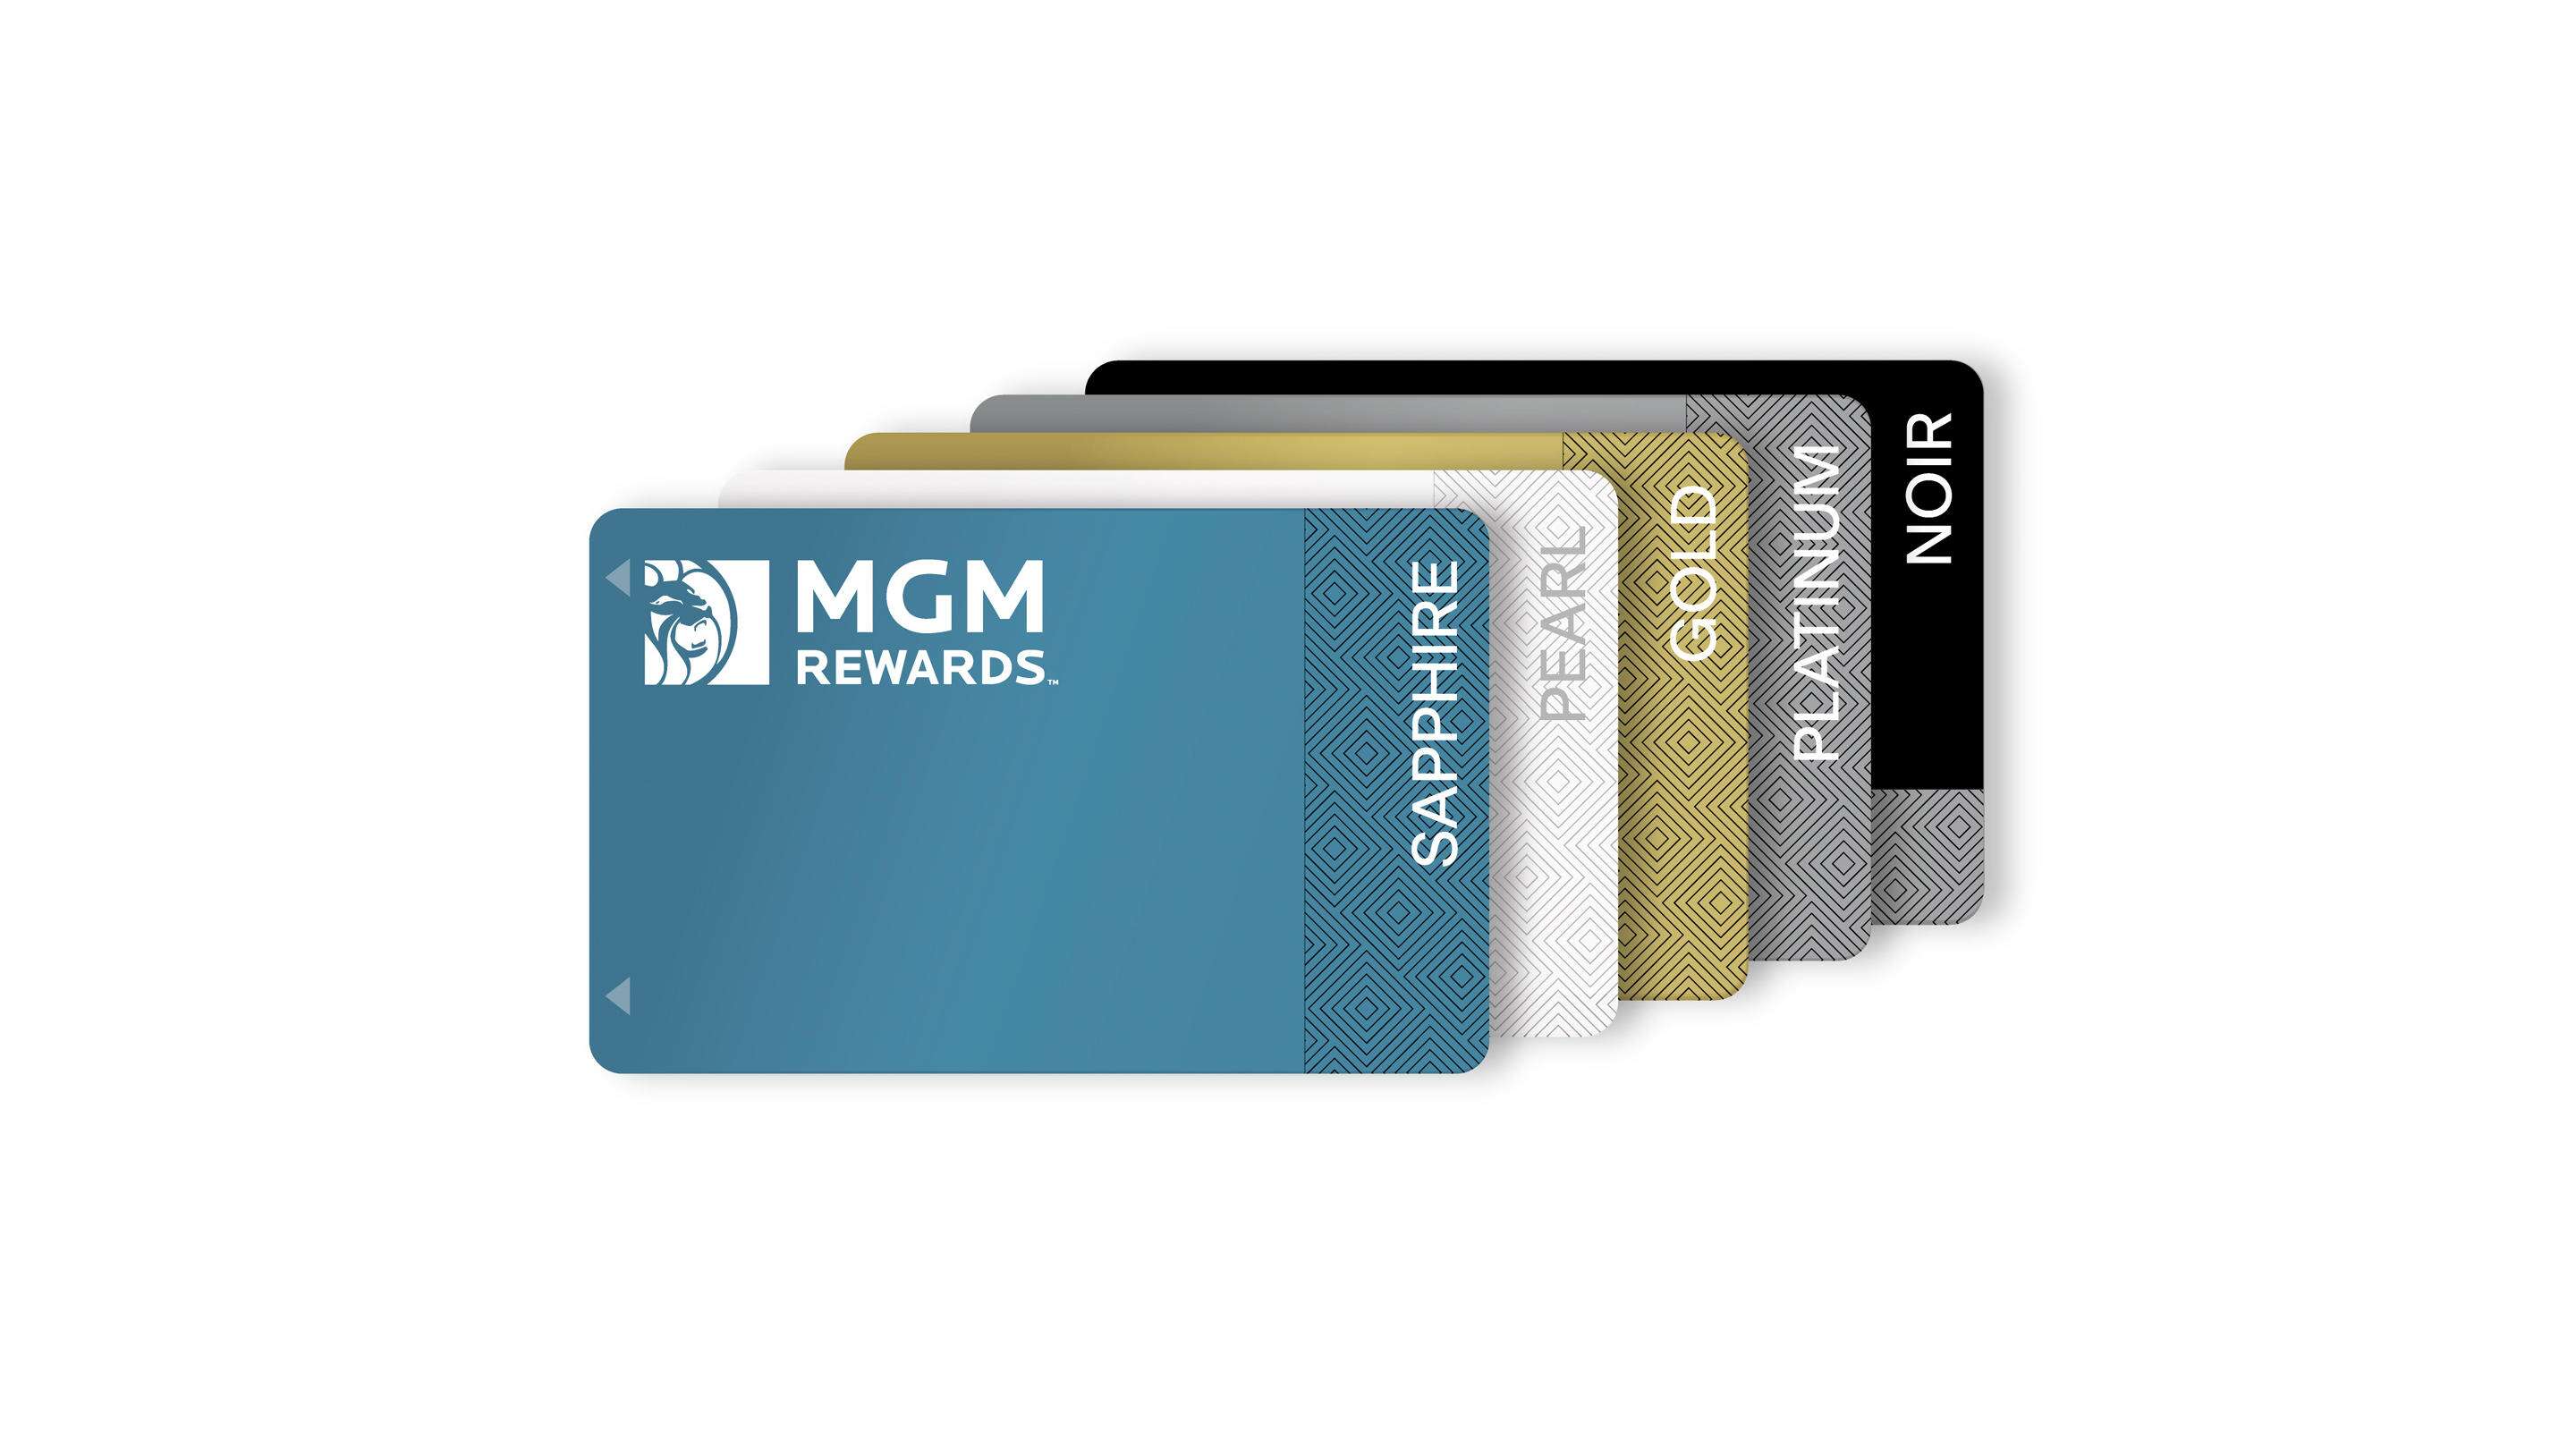 What Can I Use MGM Resort Credit For